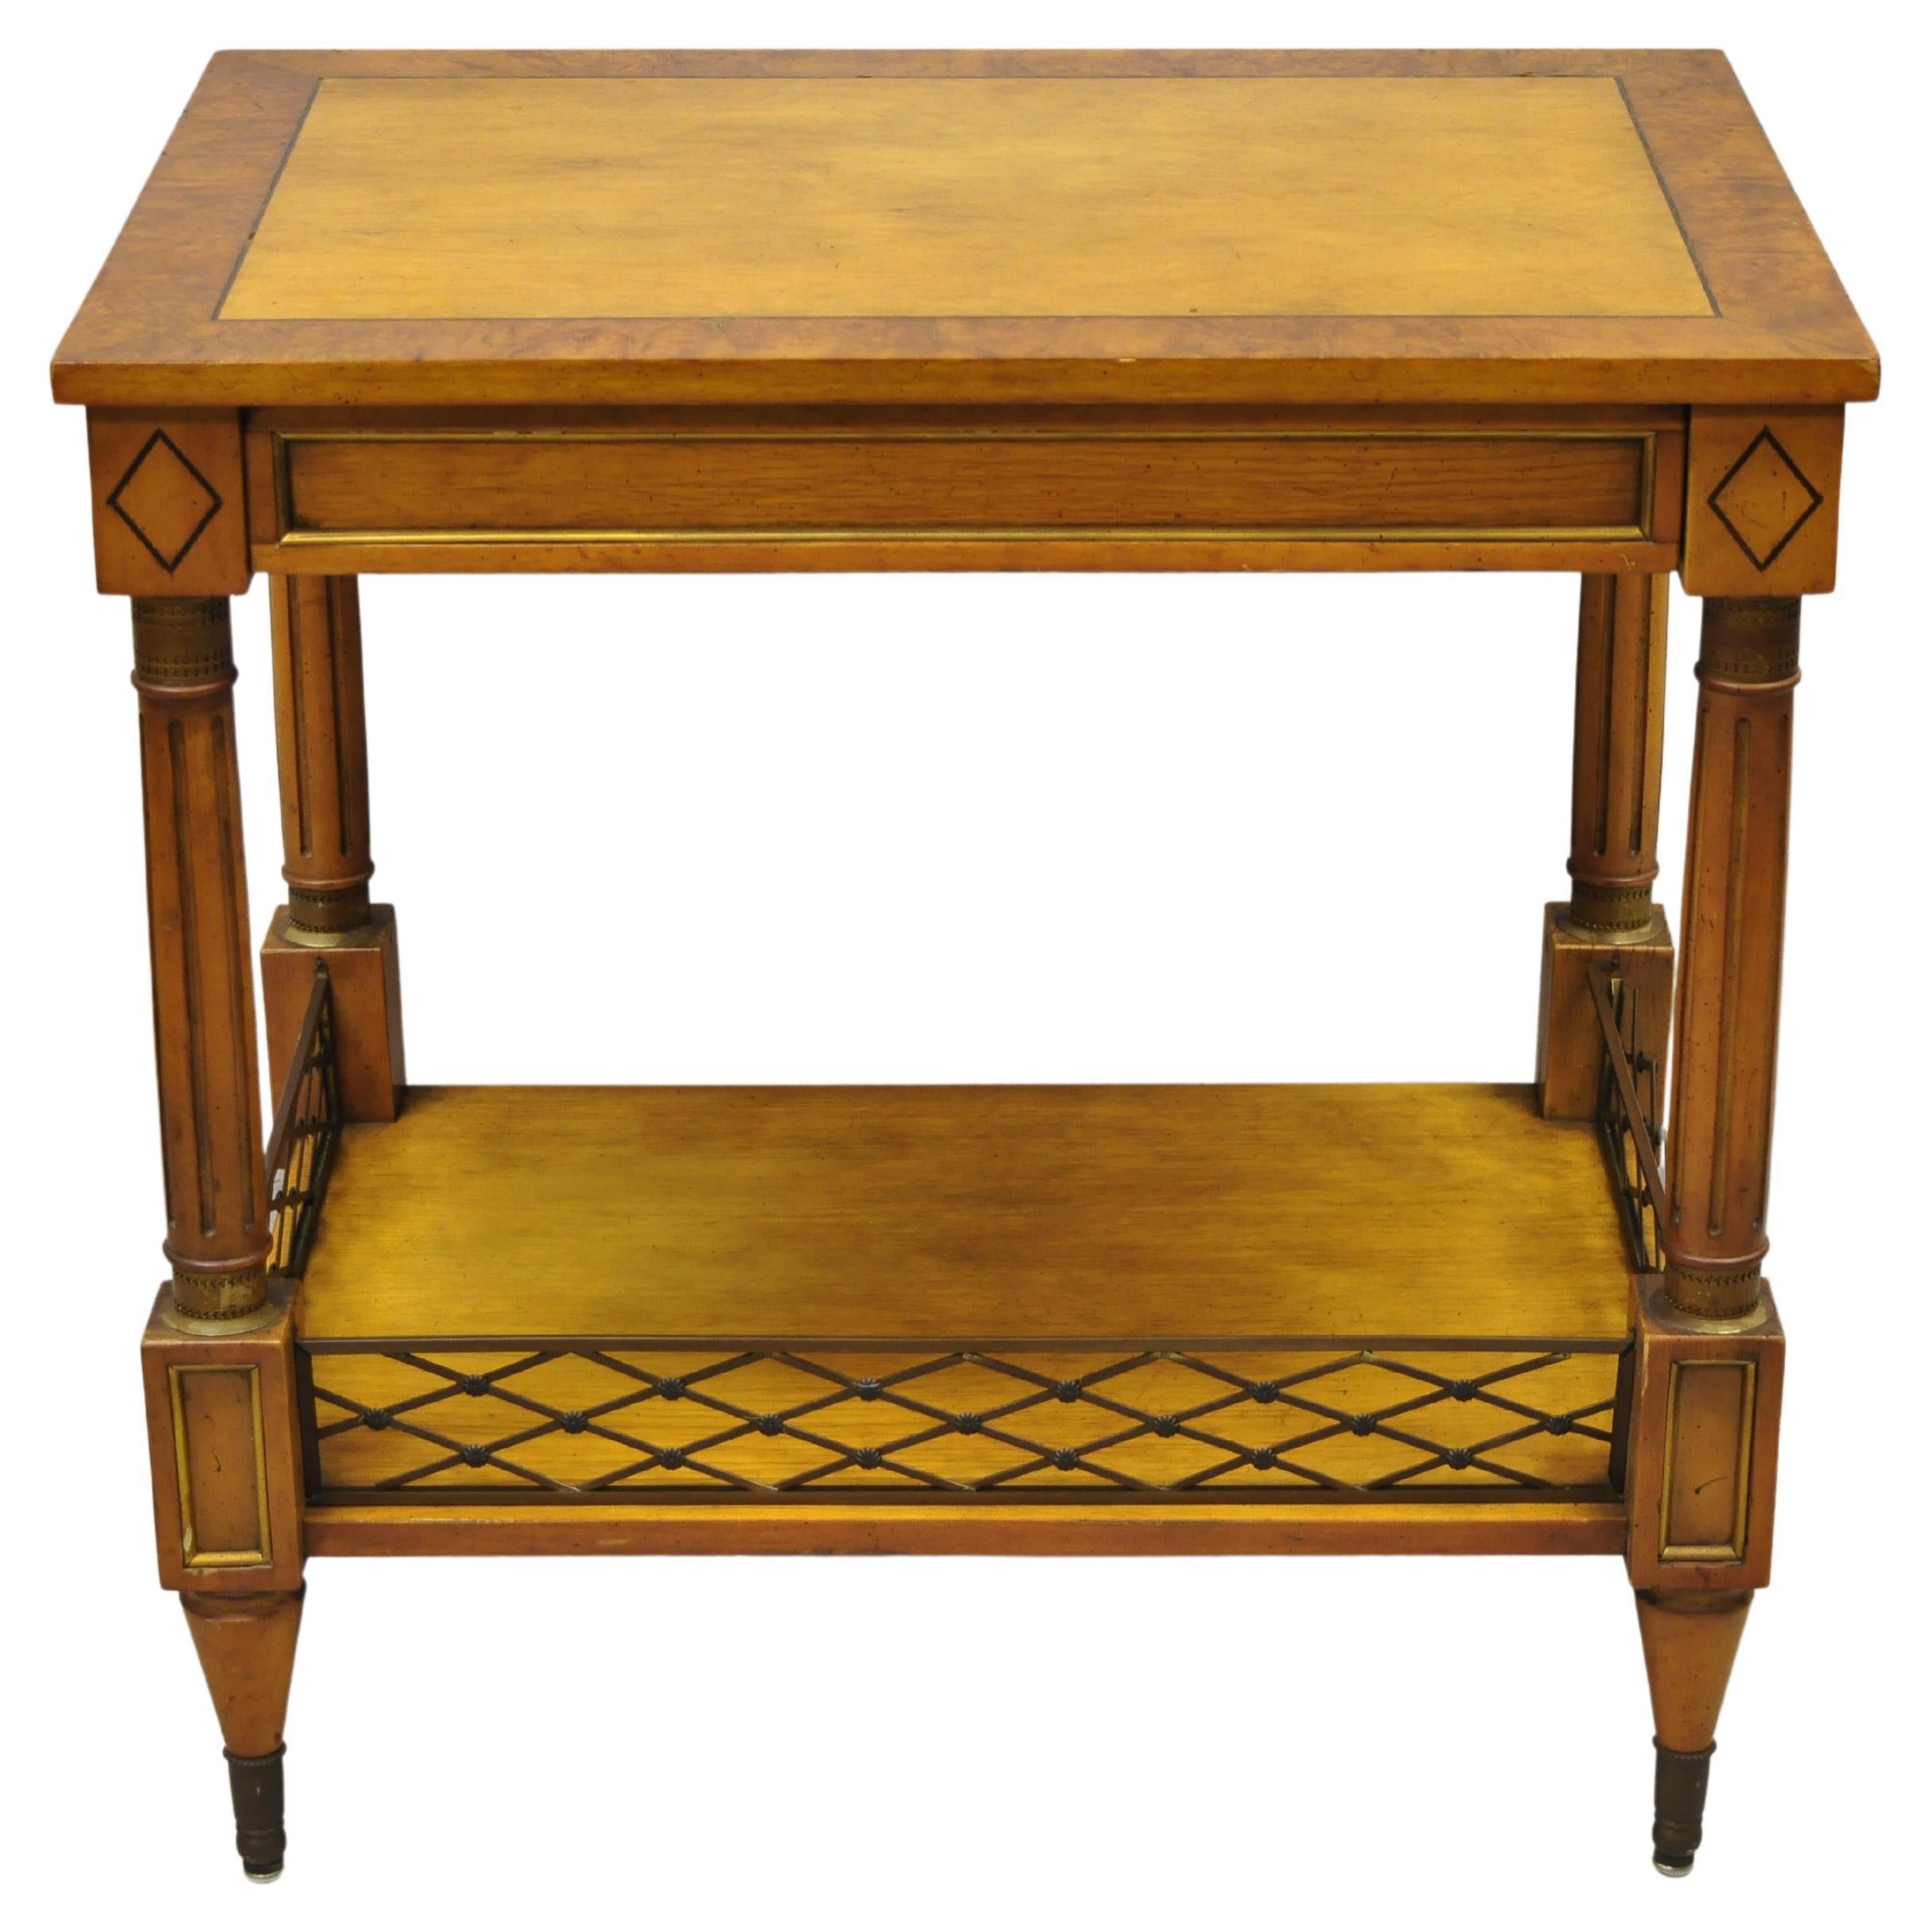 Beacon Hill Italian Regency Neoclassical One Drawer Burl Wood Accent Side Table